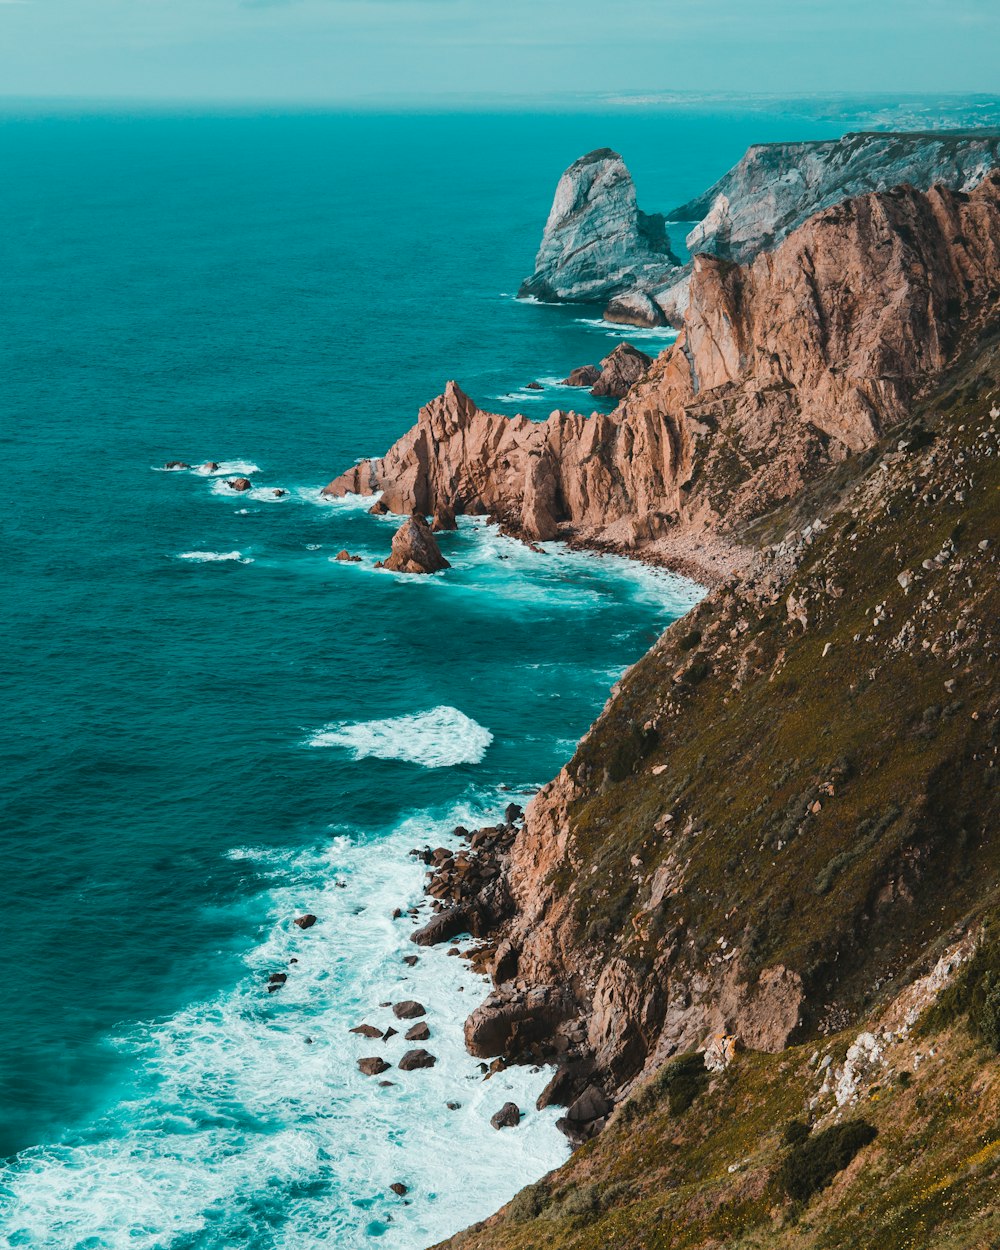 body of water across mountain photo – Free Portugal Image on Unsplash